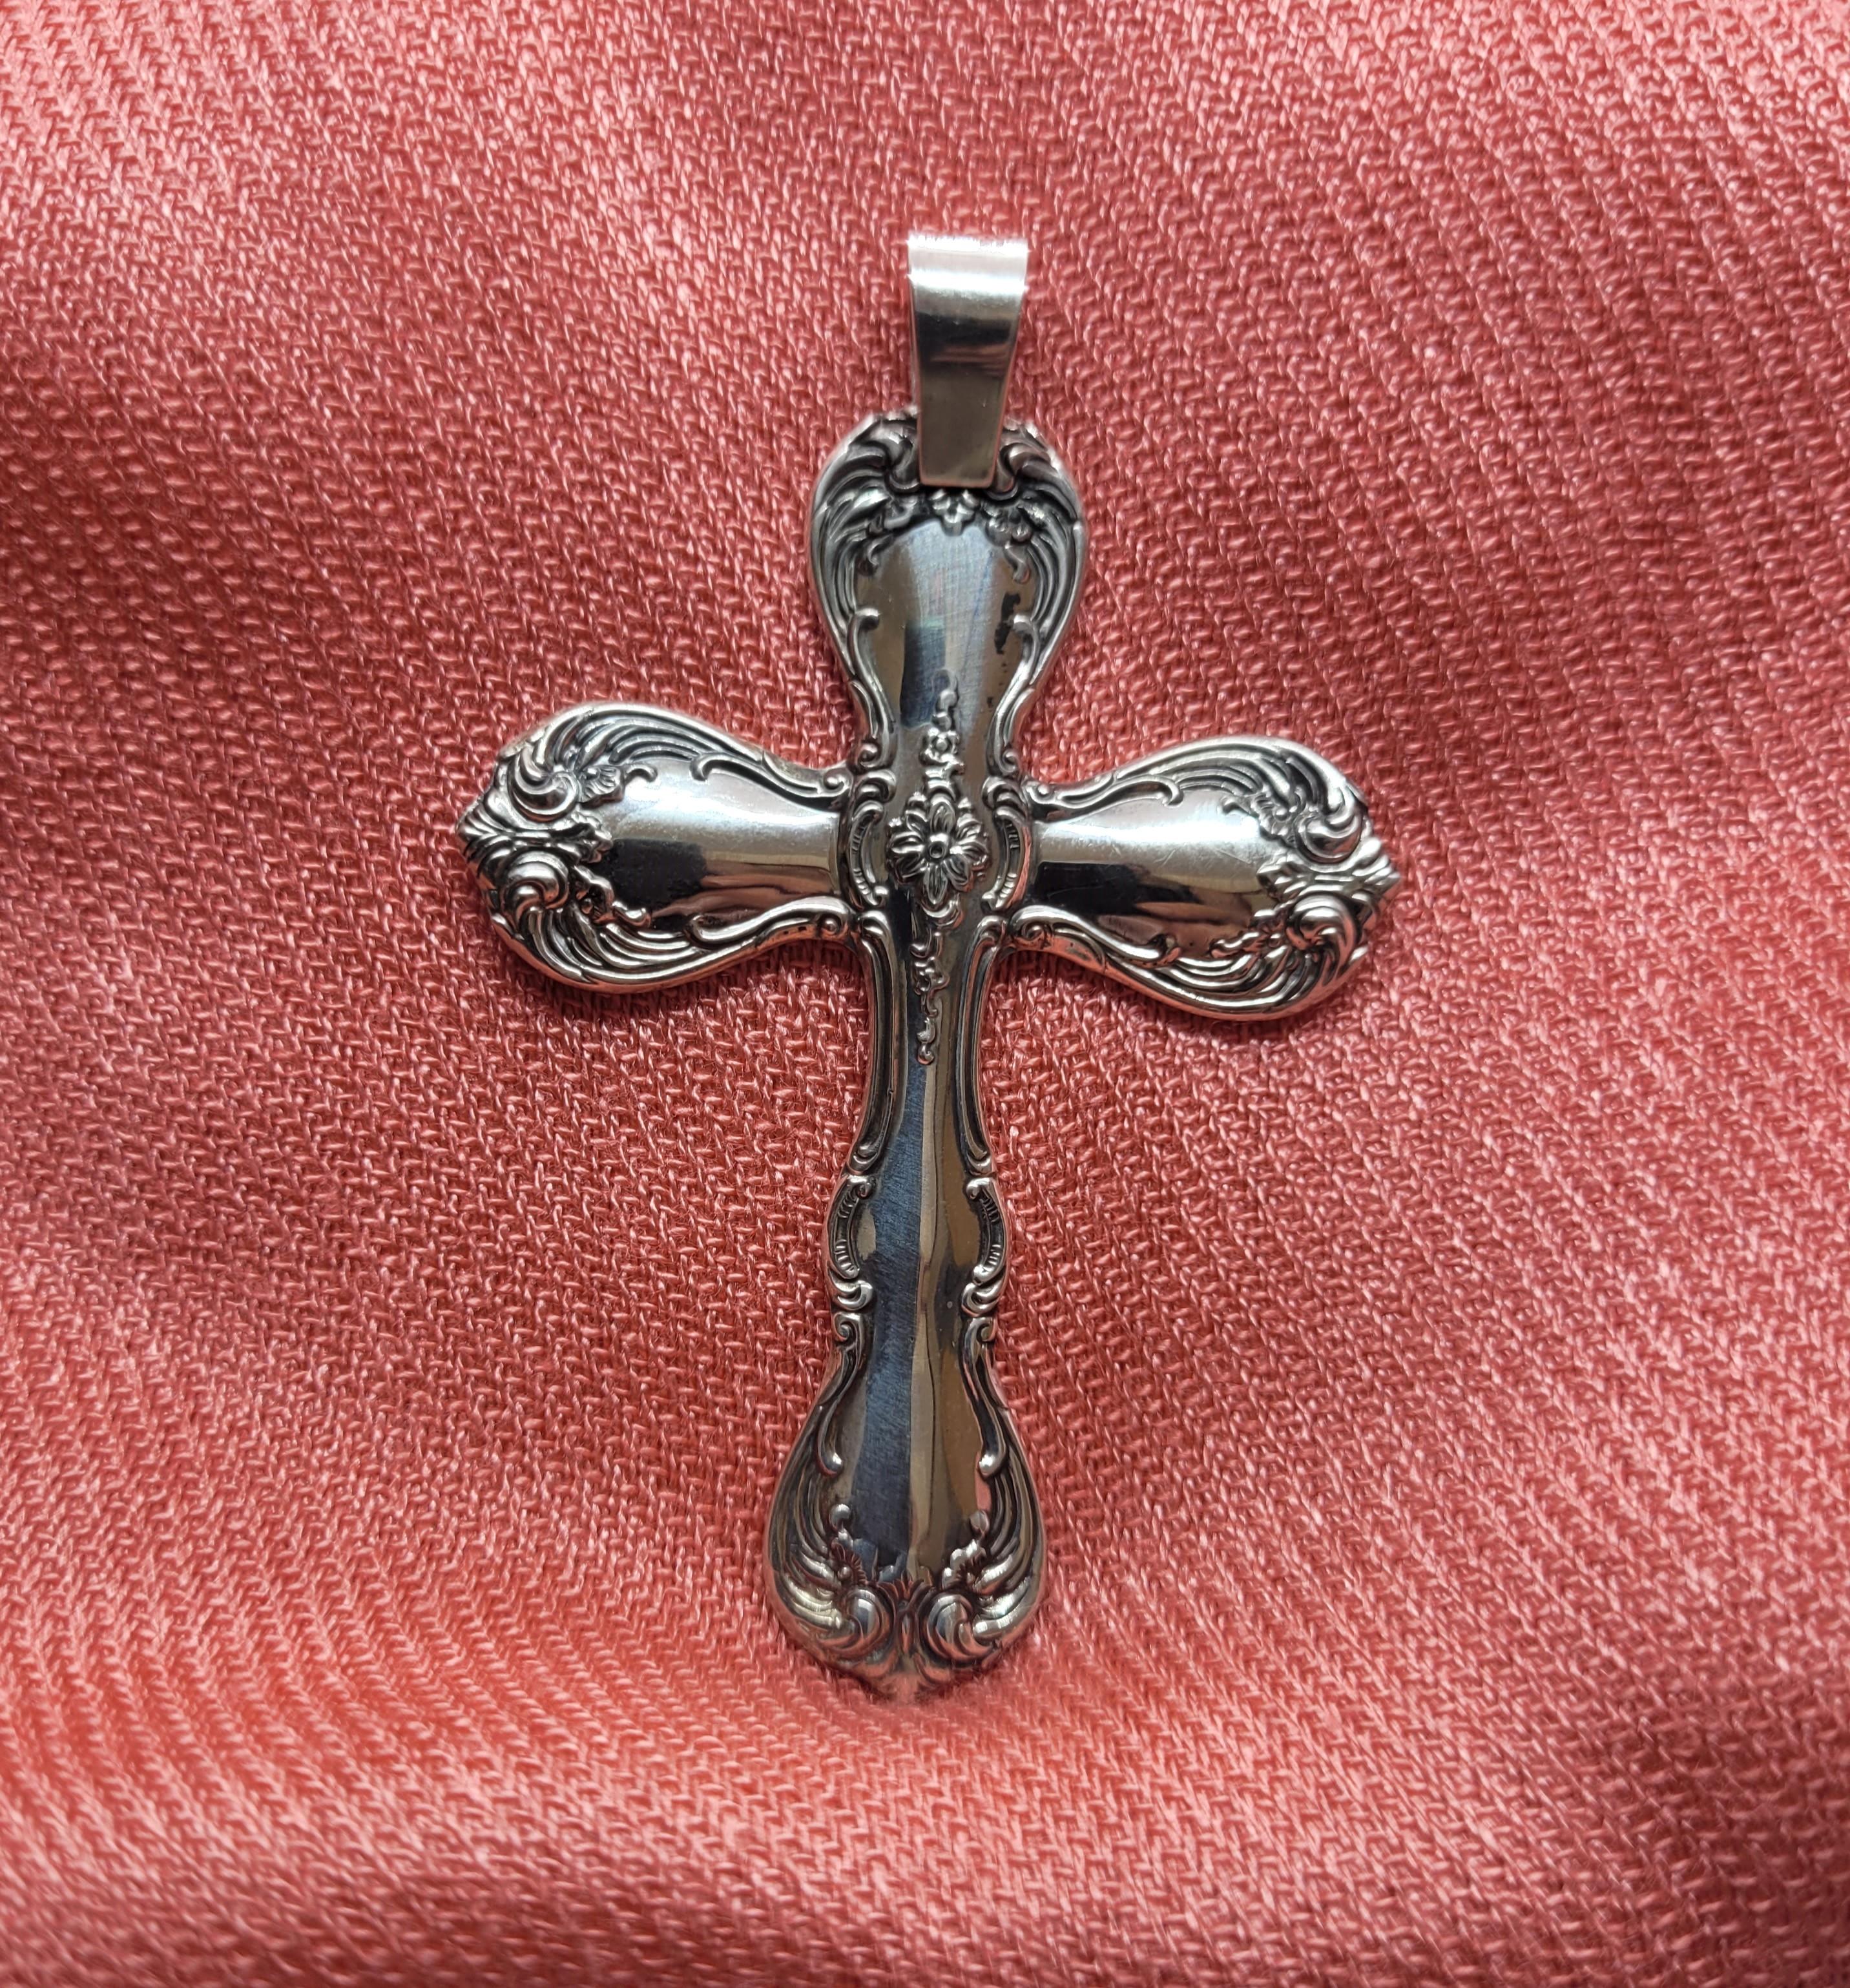 A unique sterling silver cross pendant that is made of antique sterling silver spoons by Towle Sterling featuring a lovely floral scroll design. This pendant is in very good condition, 21.2 grams, and 45.4mm x 63.15mm x 2.89mm in size (without the